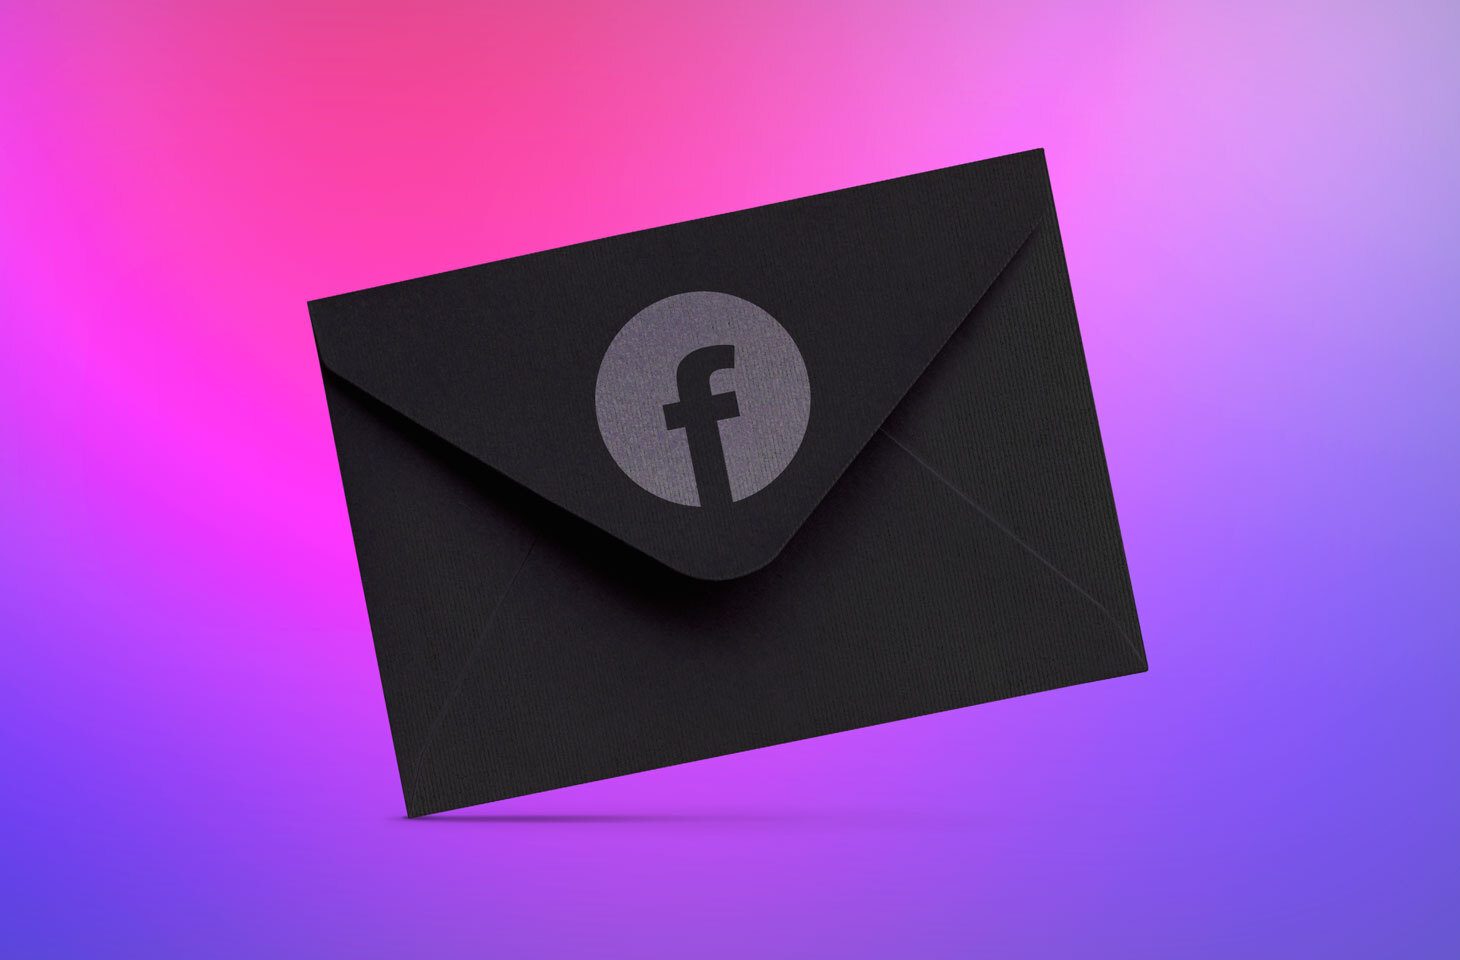 How to activate two-factor authentication on Facebook